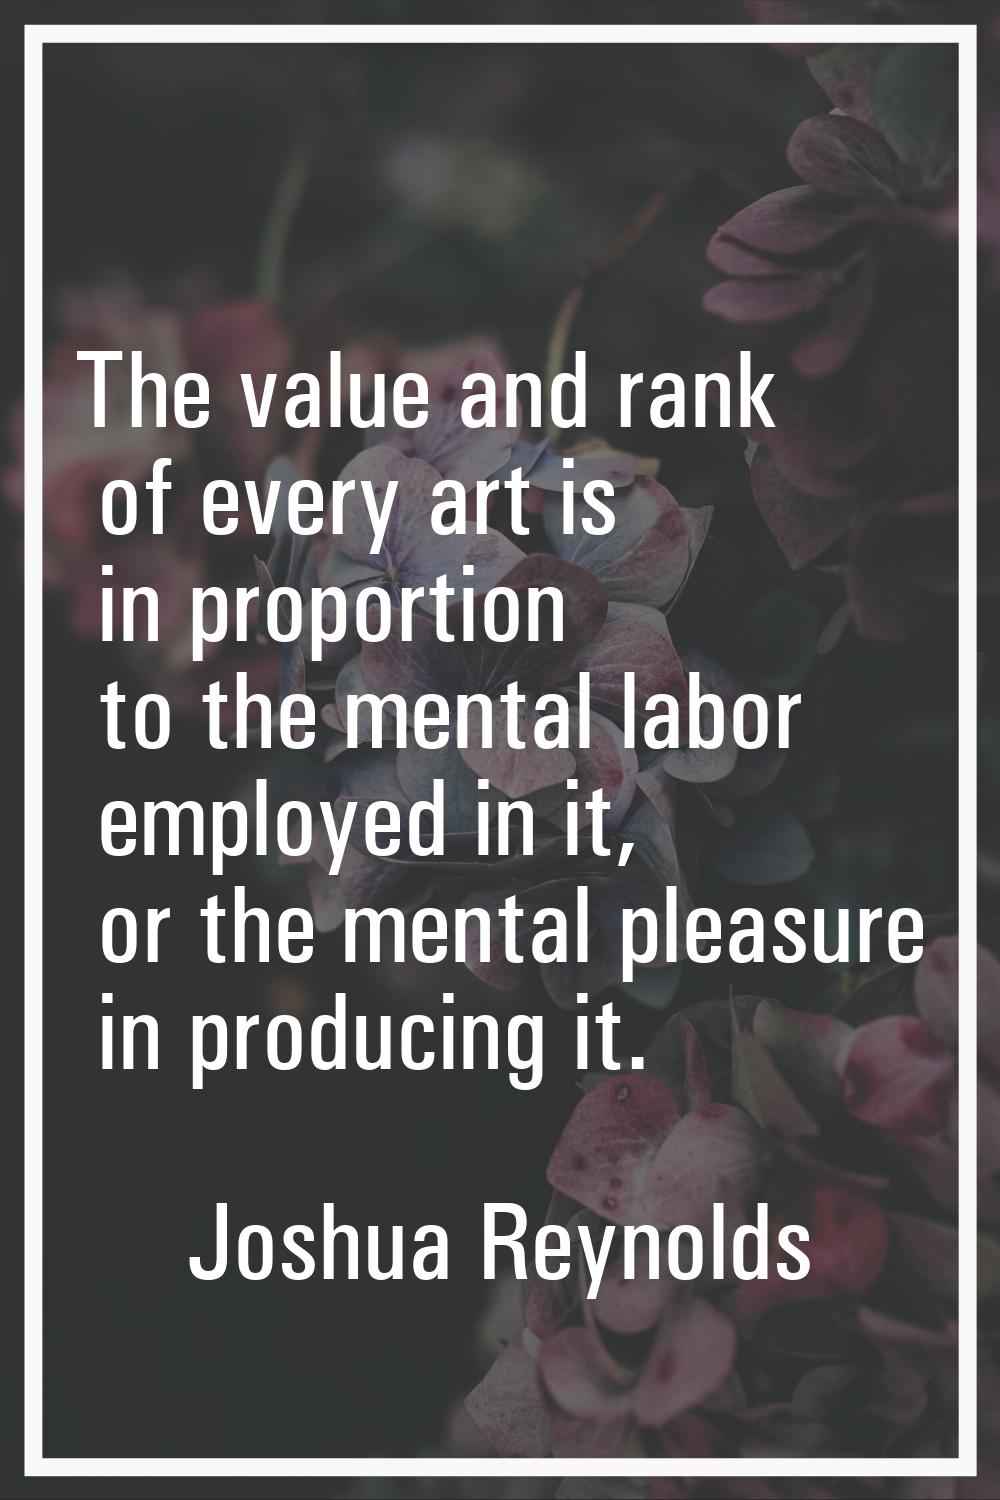 The value and rank of every art is in proportion to the mental labor employed in it, or the mental 